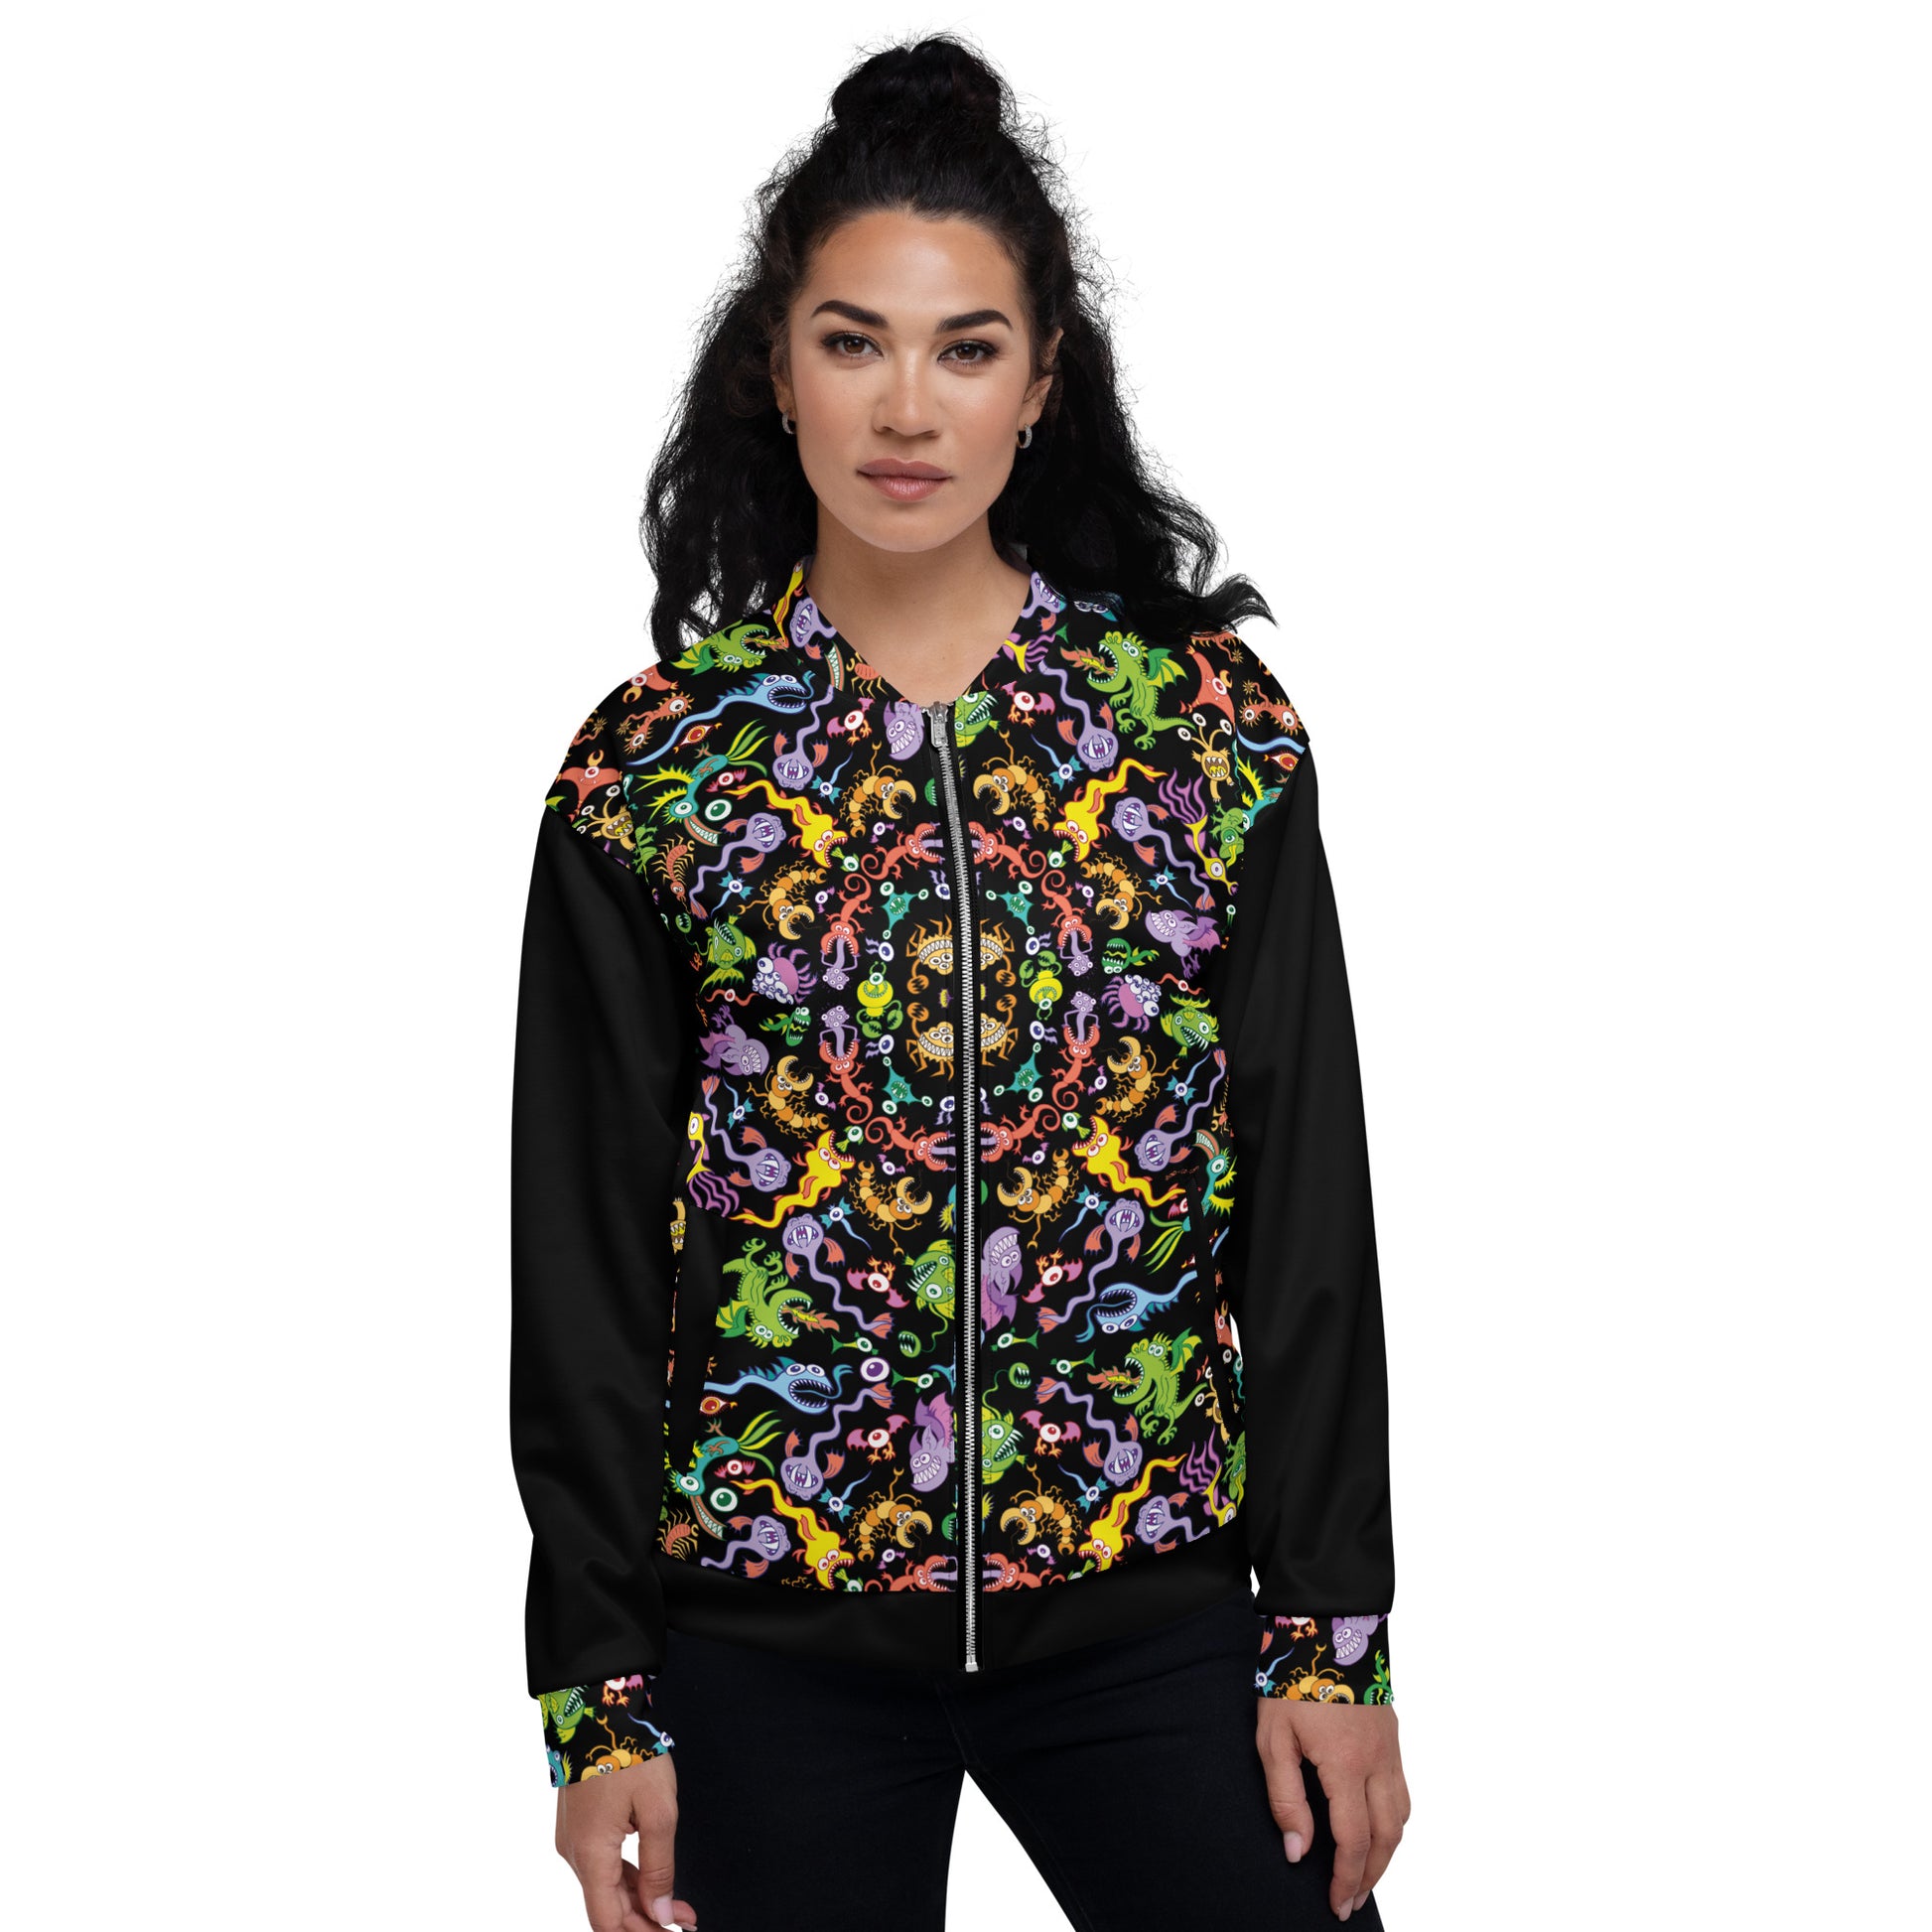 Woman wearing a Unisex Bomber Jacket All-over printed with Ocean critters pattern mandala